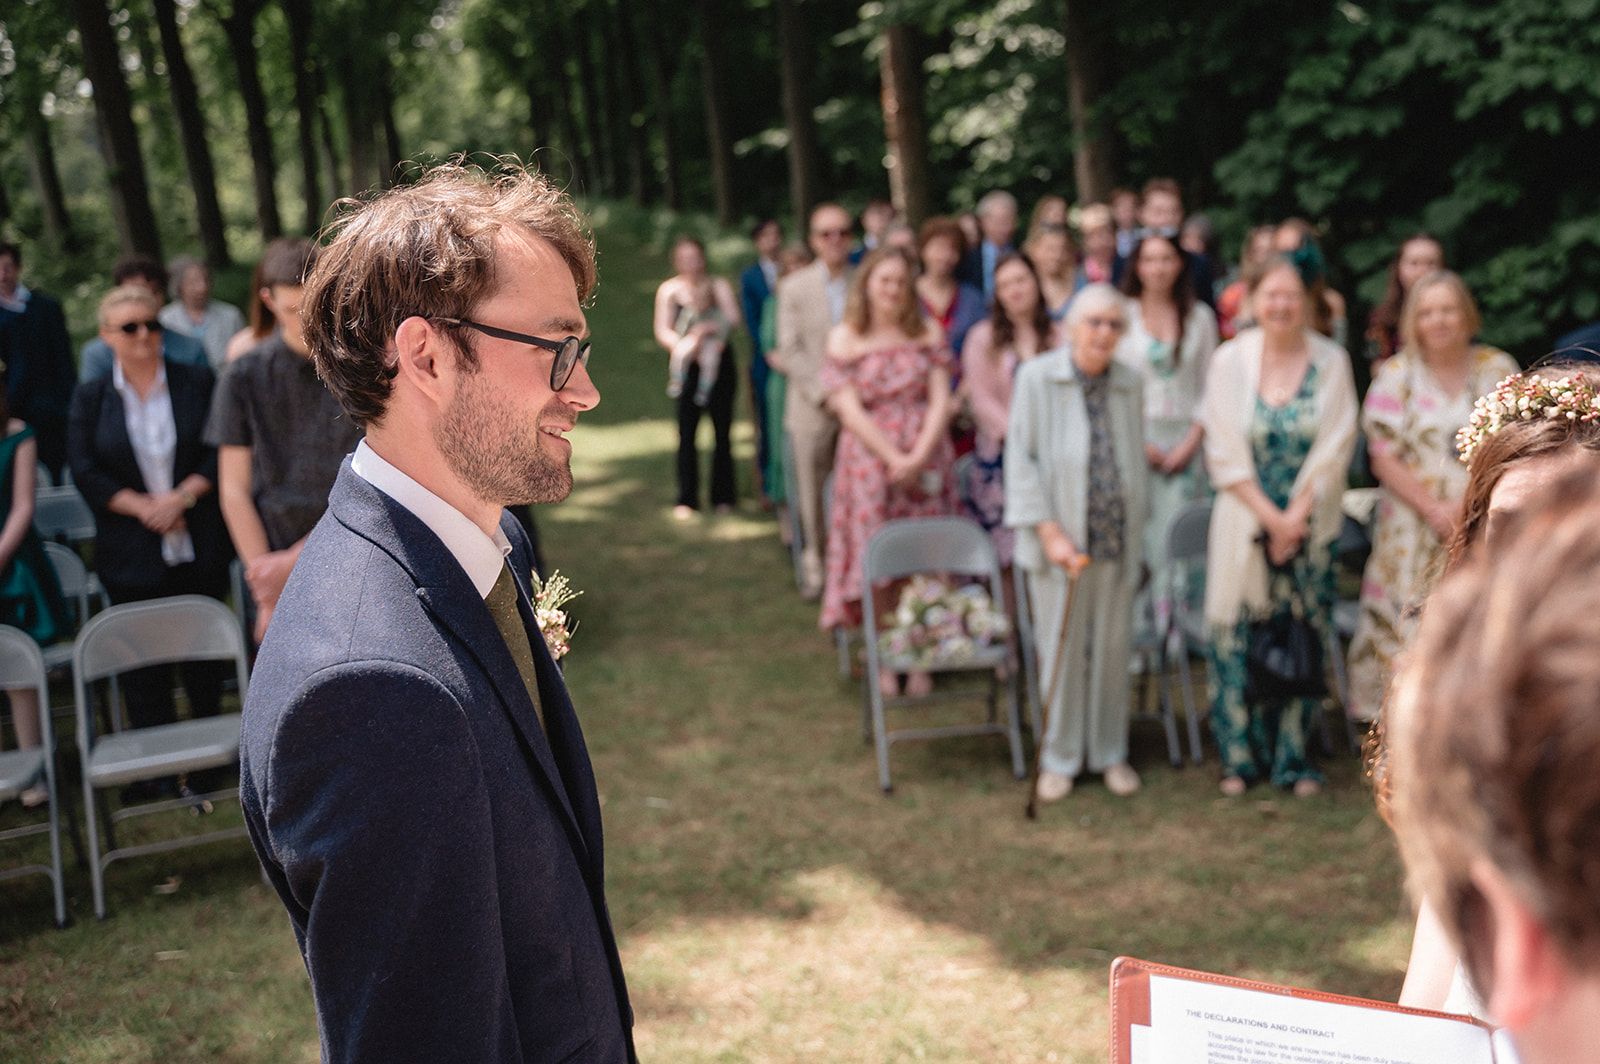 Eleanor and Hartley's  Wedding ceremony at the Organ House at St. Paul's Walden Bury